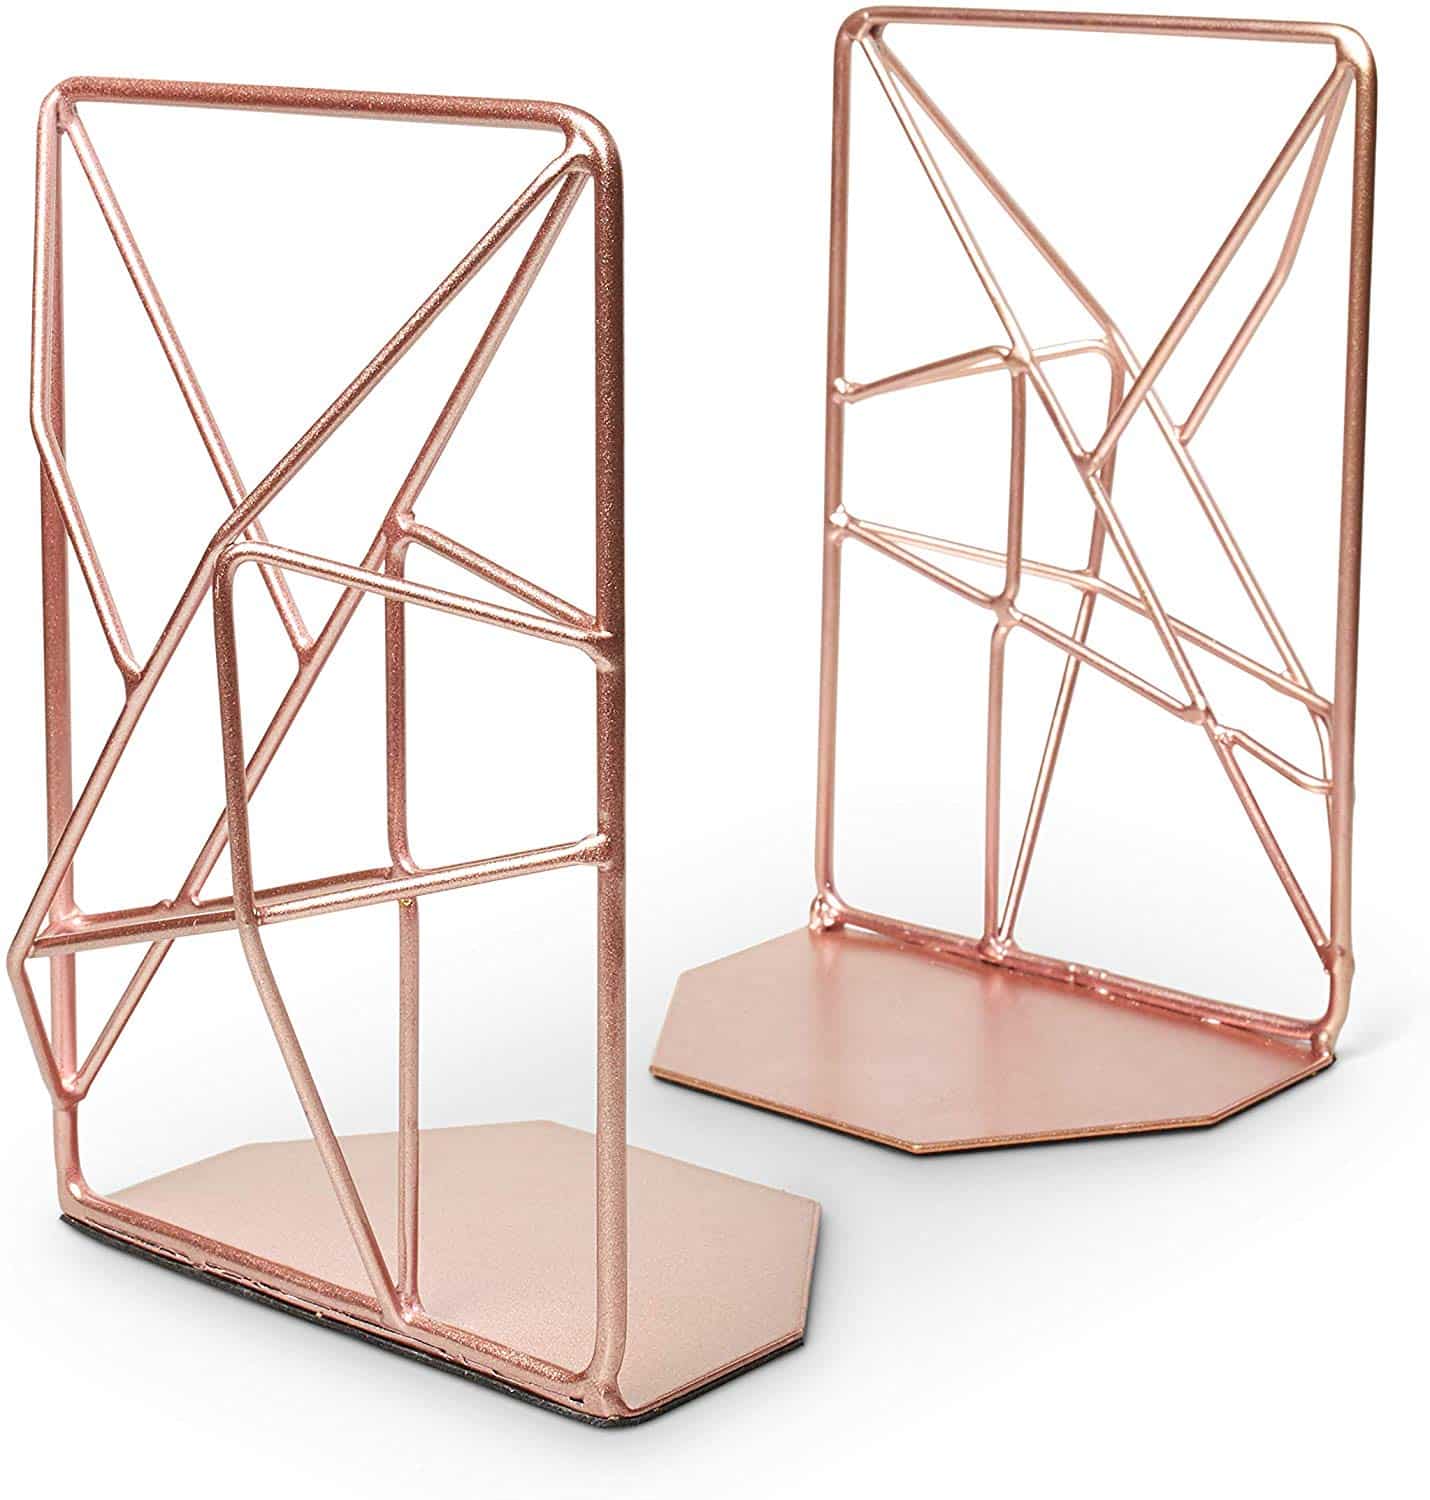 pink-desk-accessories-bookends